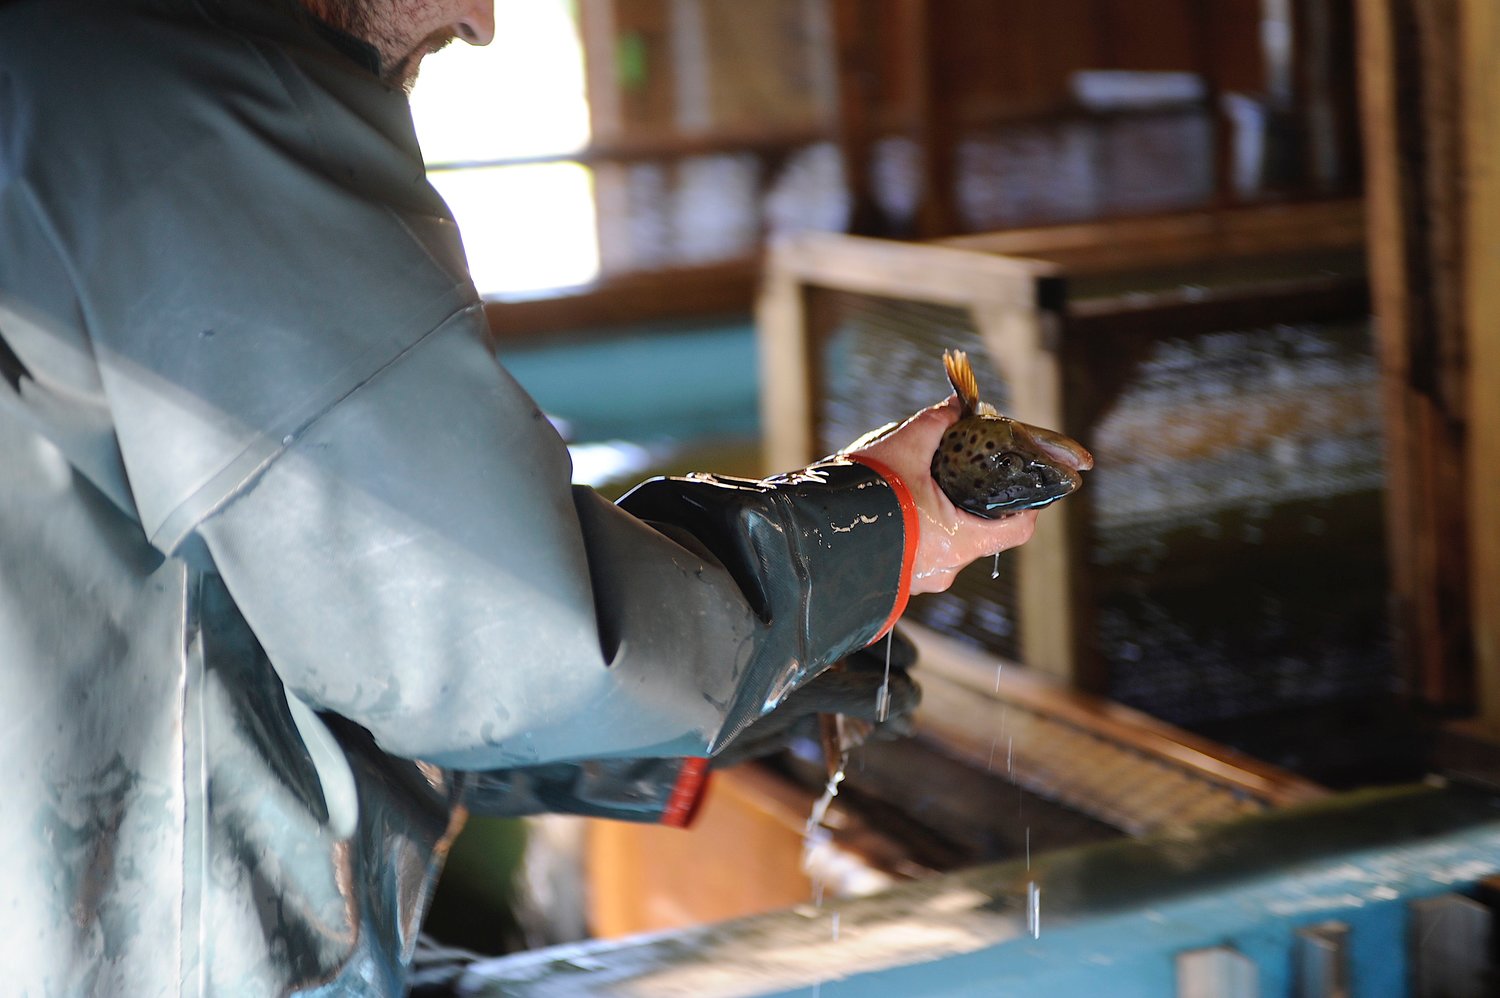 The selection process. A NYS DEC fish culturist selects a brown trout that is deemed ready for harvesting eggs. Now they’re on their way to produce millions of fish that will be released into waterways in 2023.